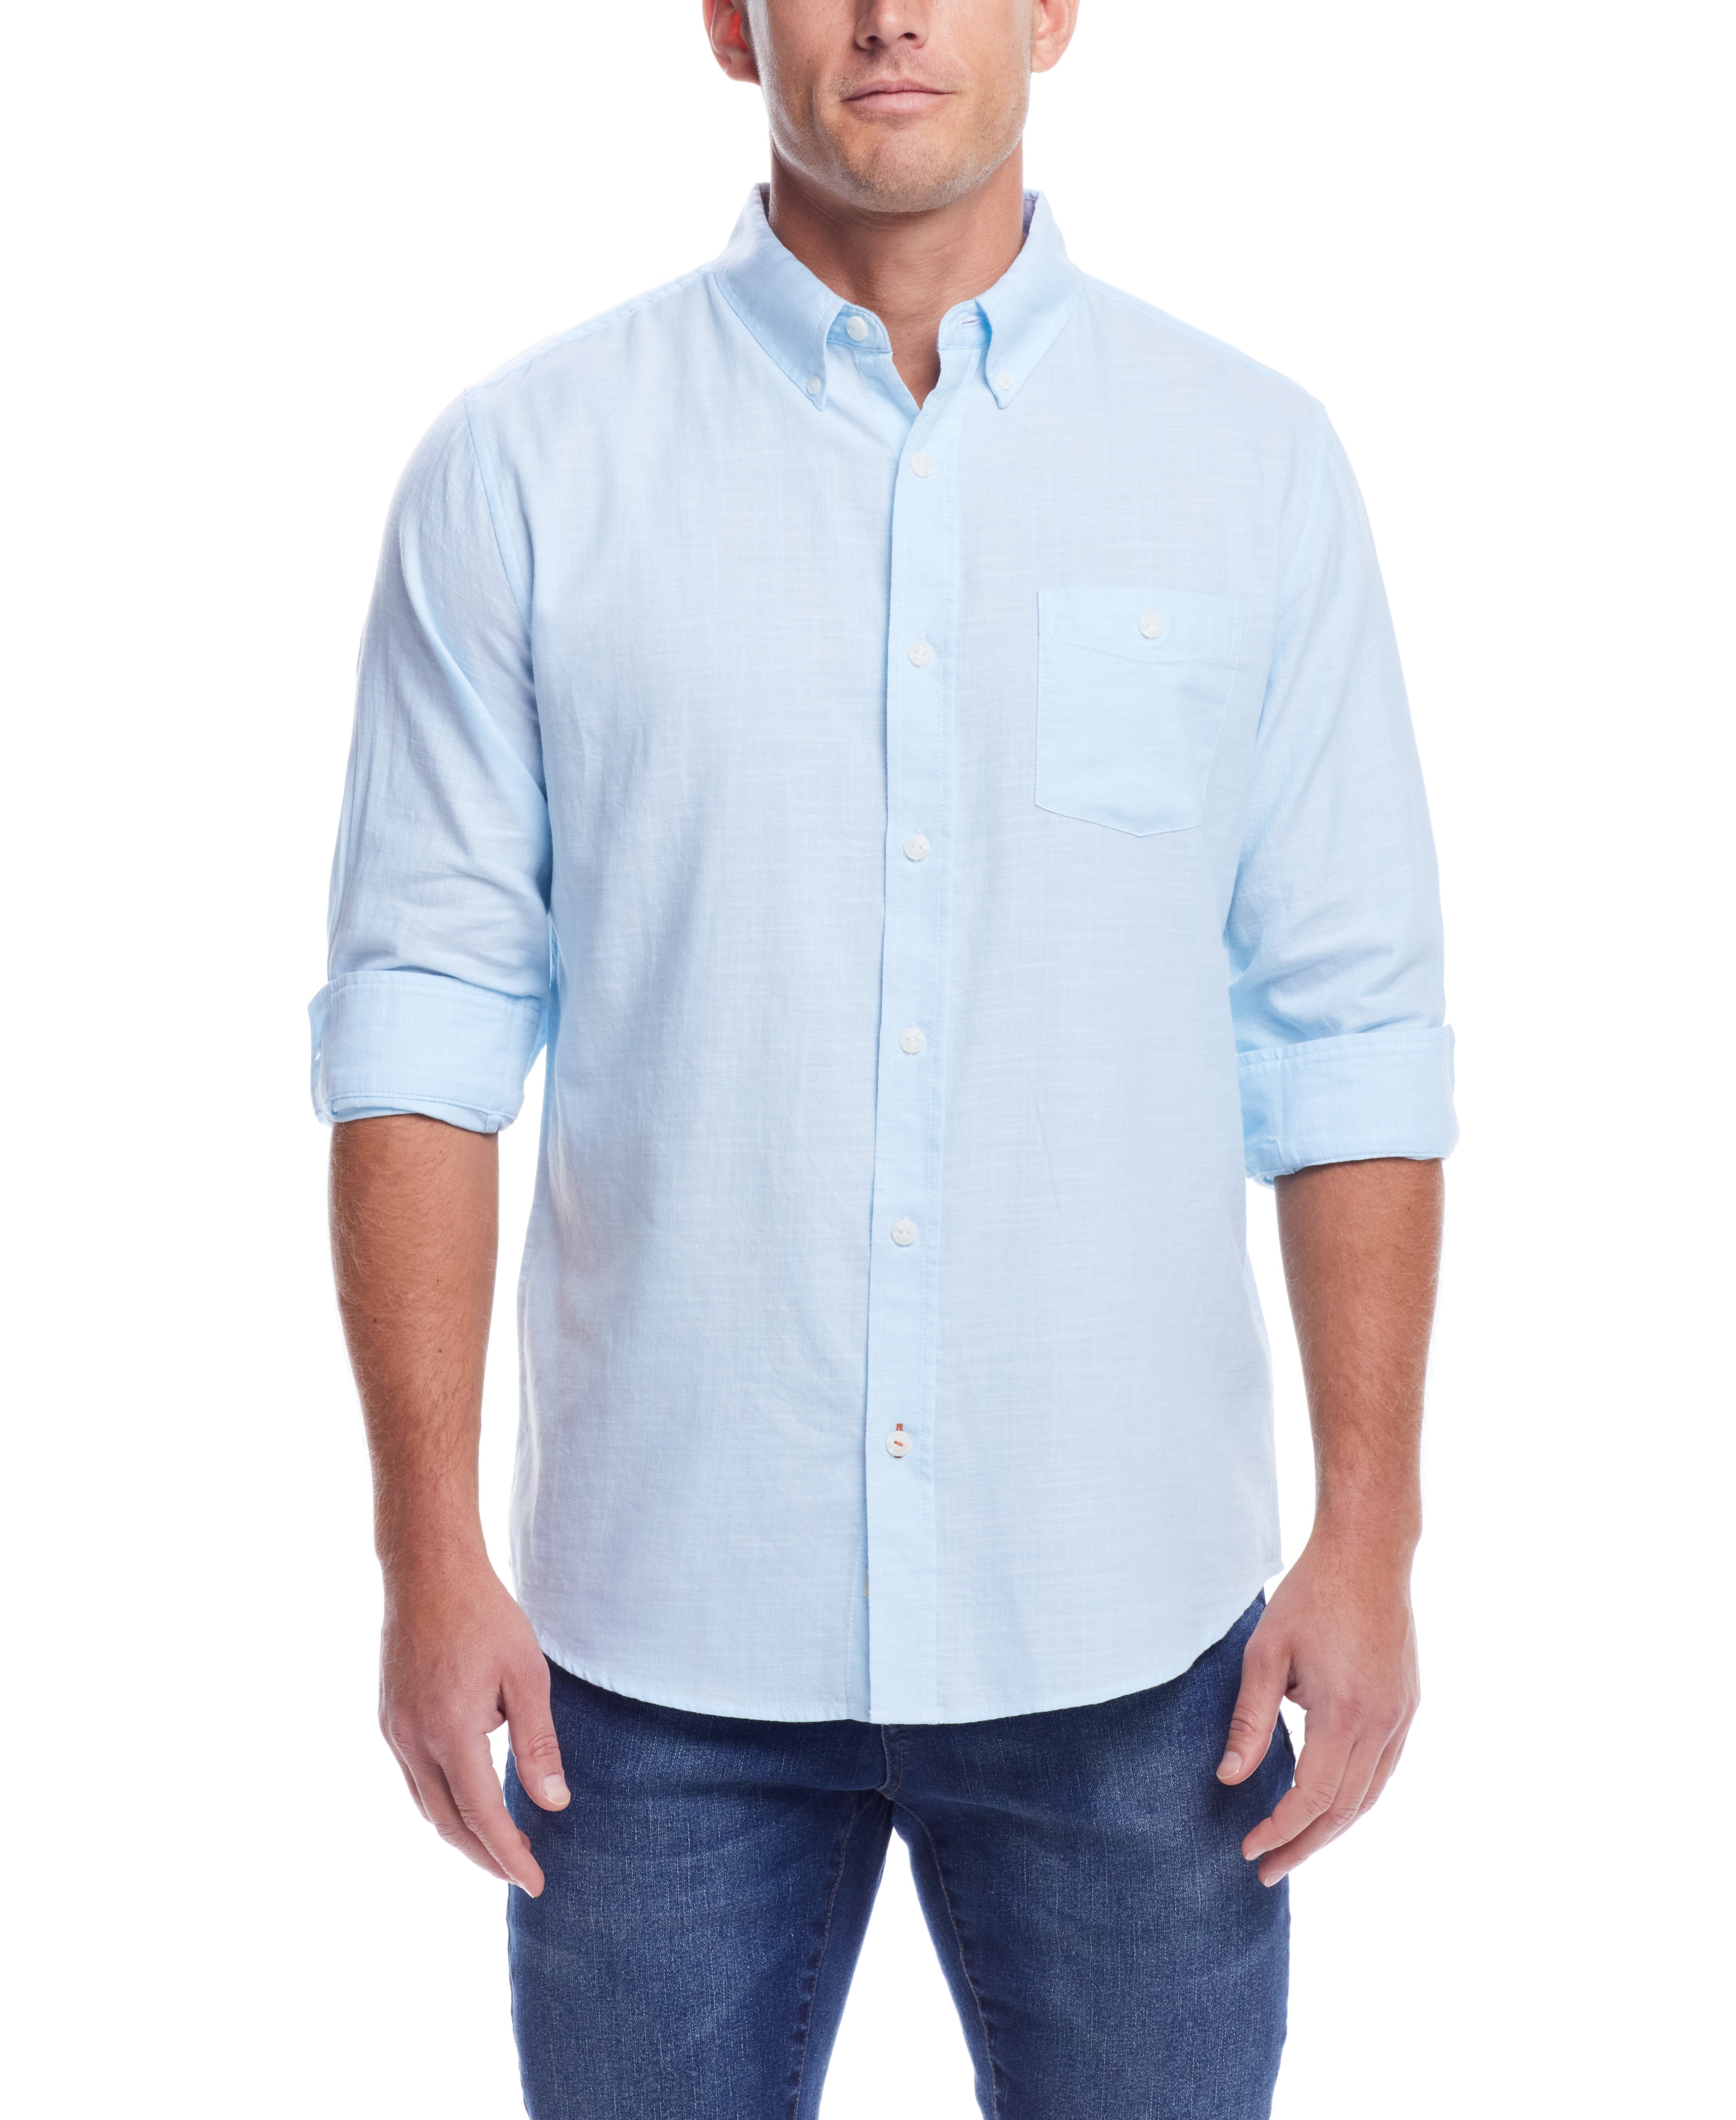 LONG SLEEVE SOLID COTTON TWILL SHIRT in CRYSTAL BLUE